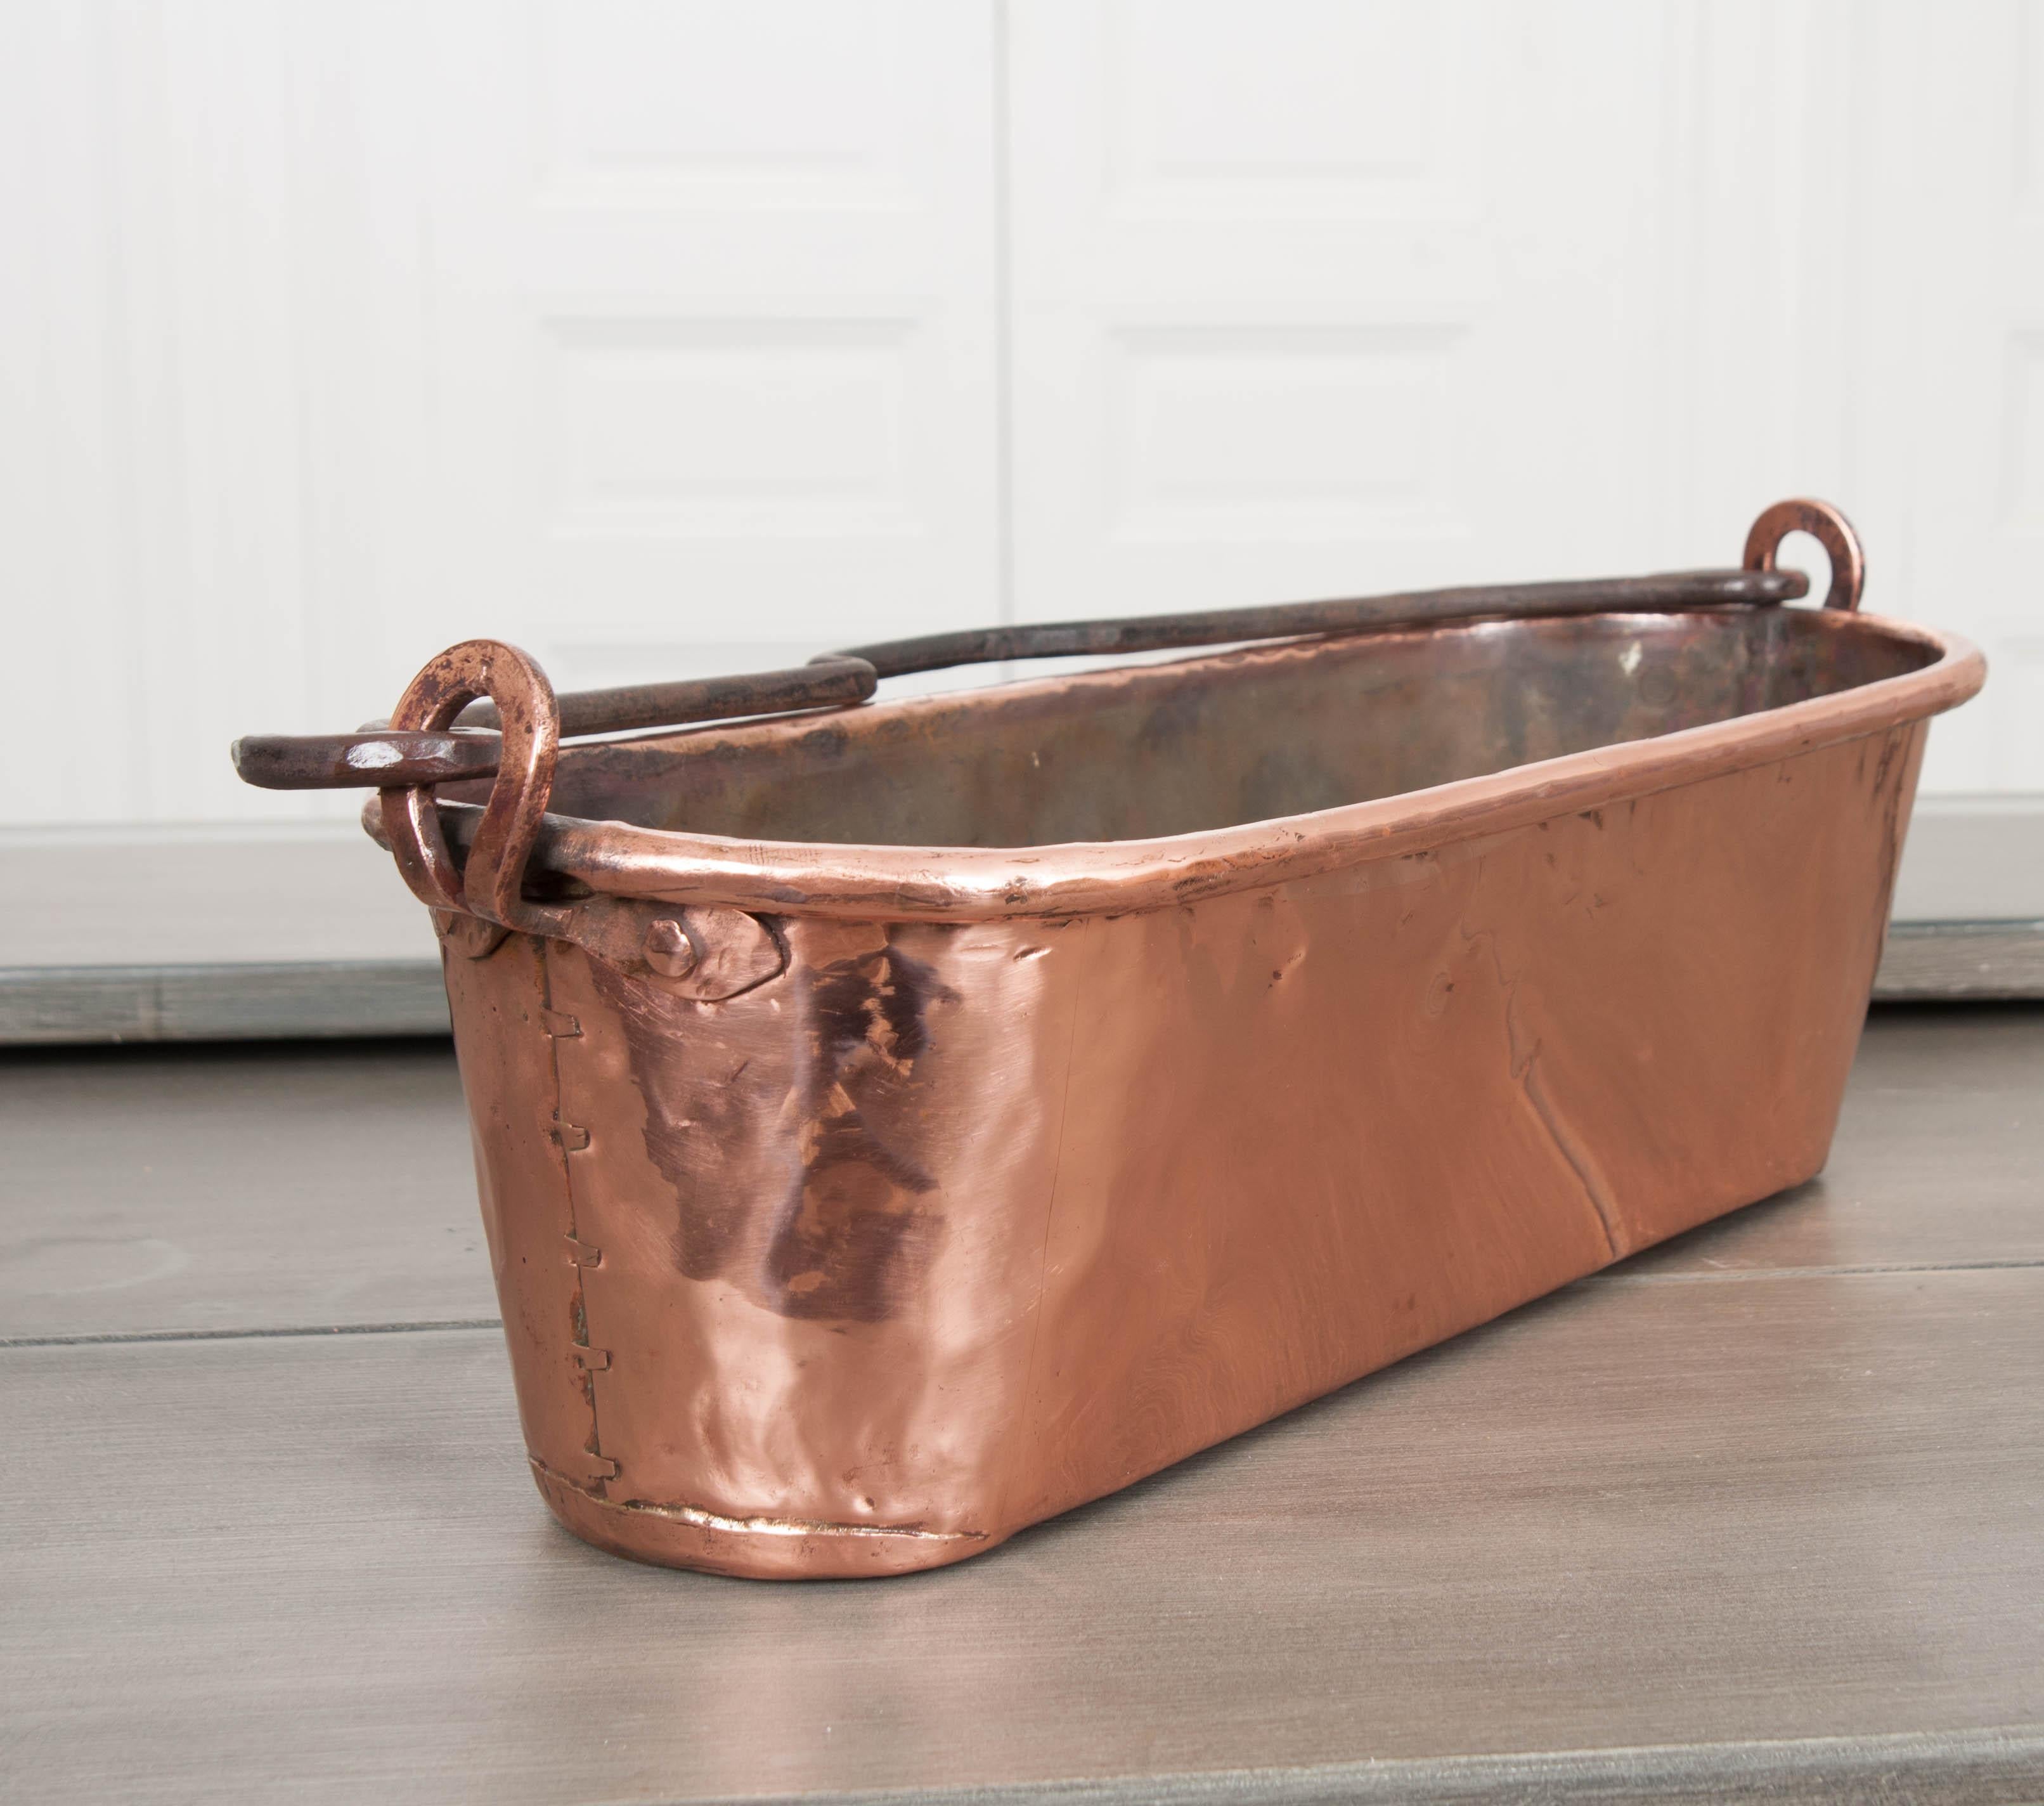 Hand-Crafted French 19th Century Copper Fish Kettle, or Poisonierre